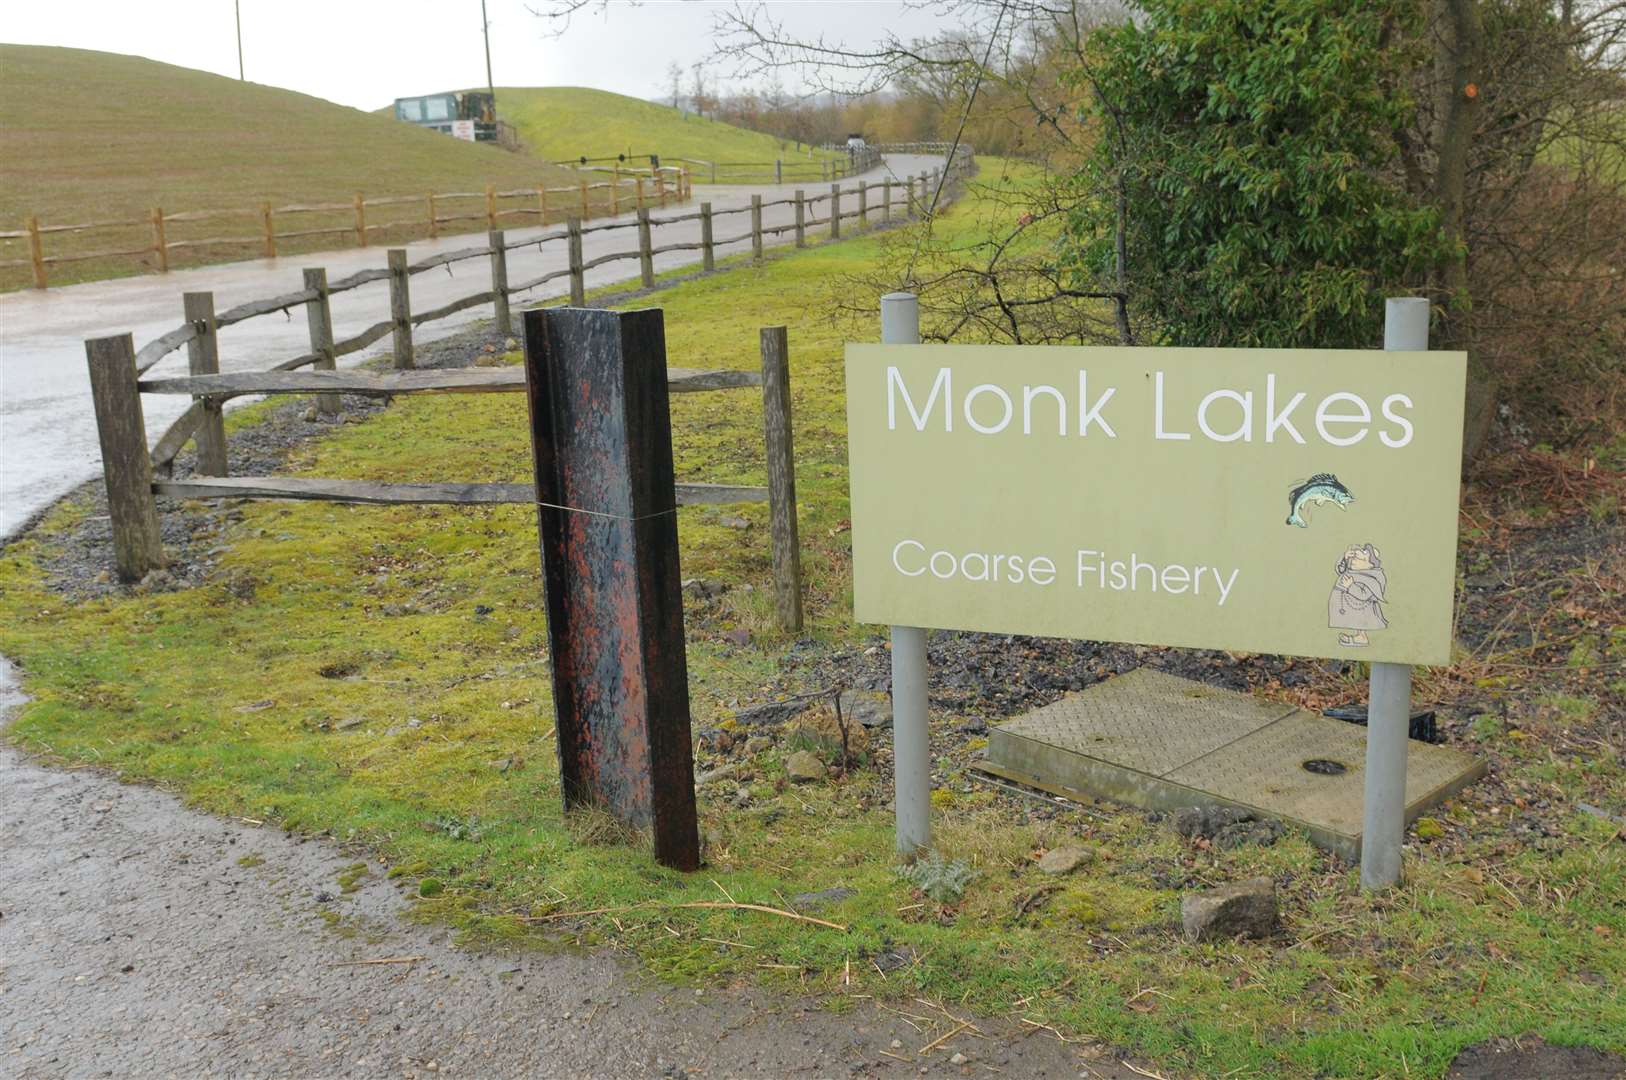 Three of the offenders were fishing at Monk Lakes without a license. Picture: Steve Crispe